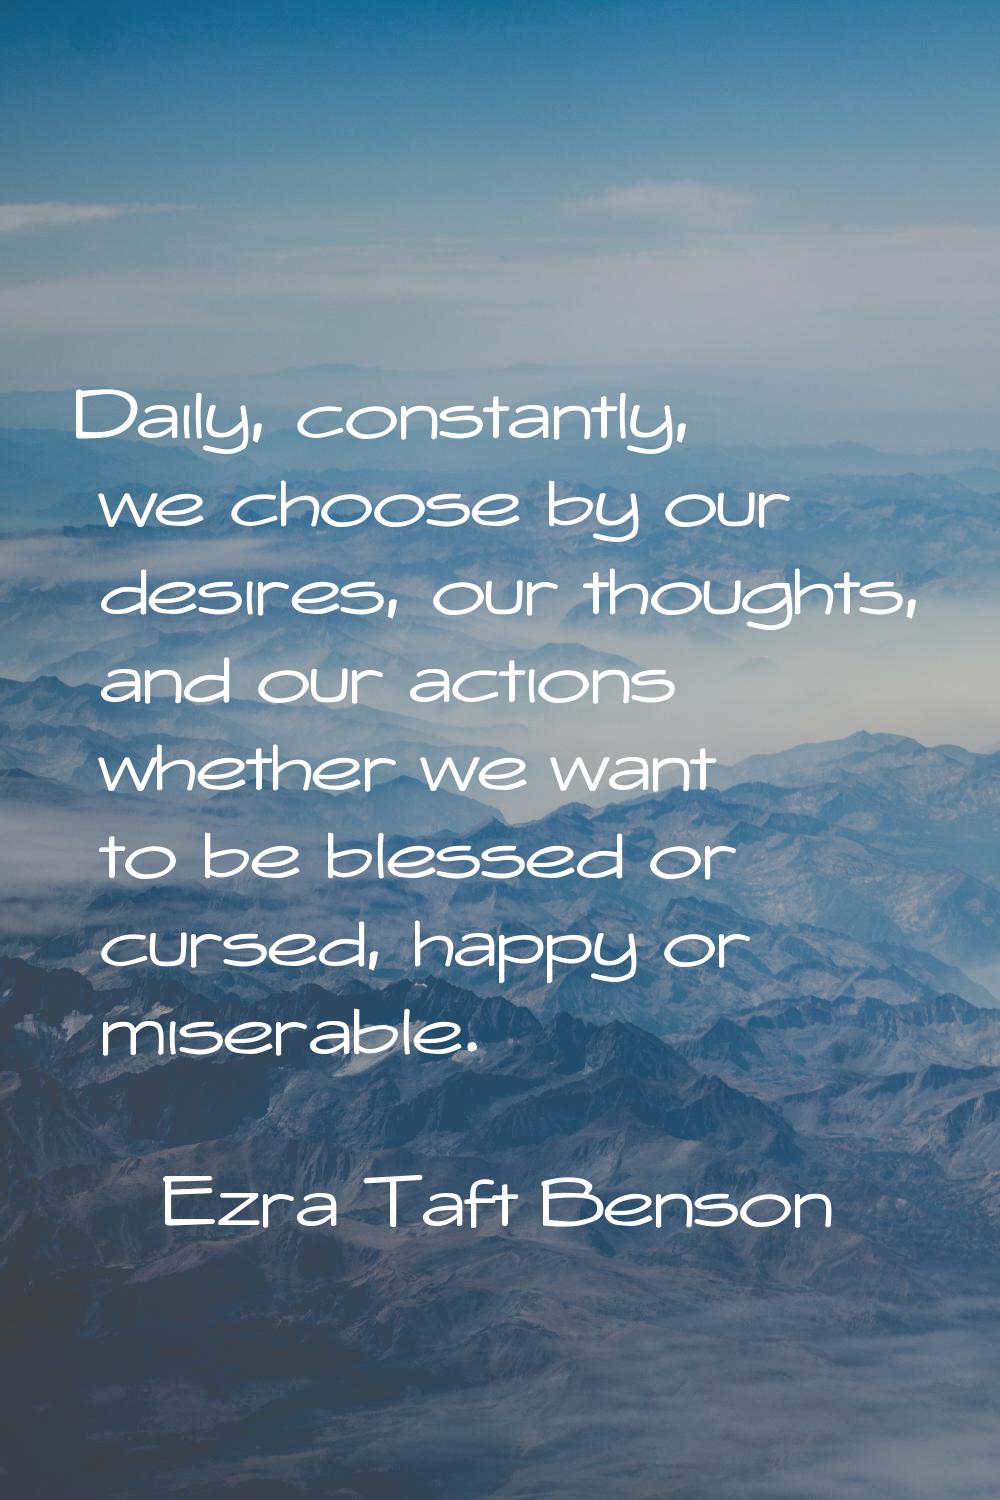 Daily, constantly, we choose by our desires, our thoughts, and our actions whether we want to be bl